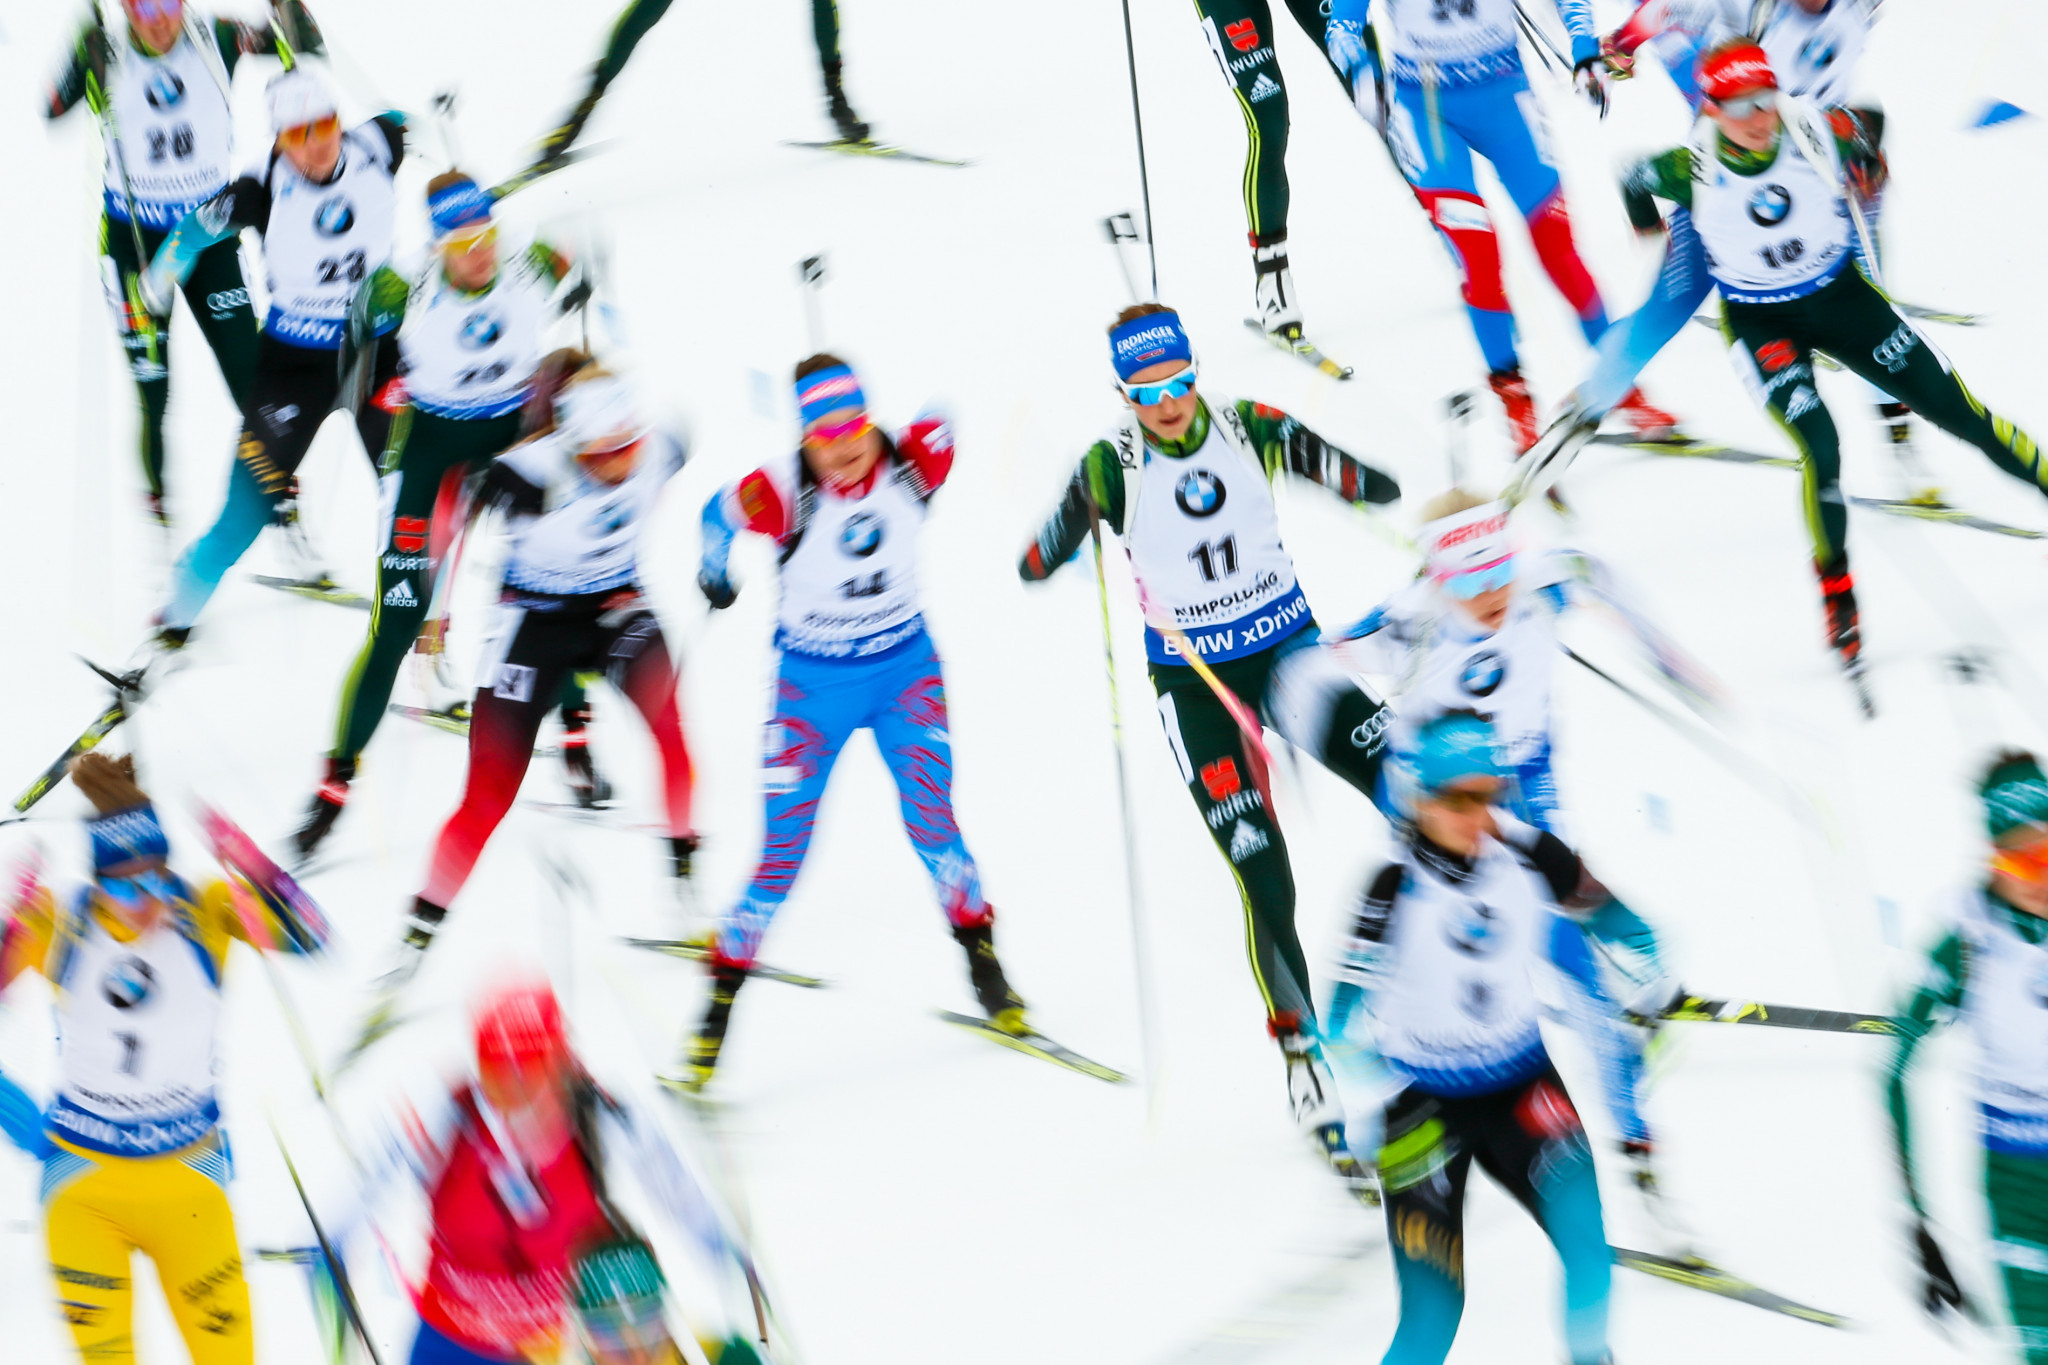 Biathlon has faced governance issues away from the action ©Getty Images